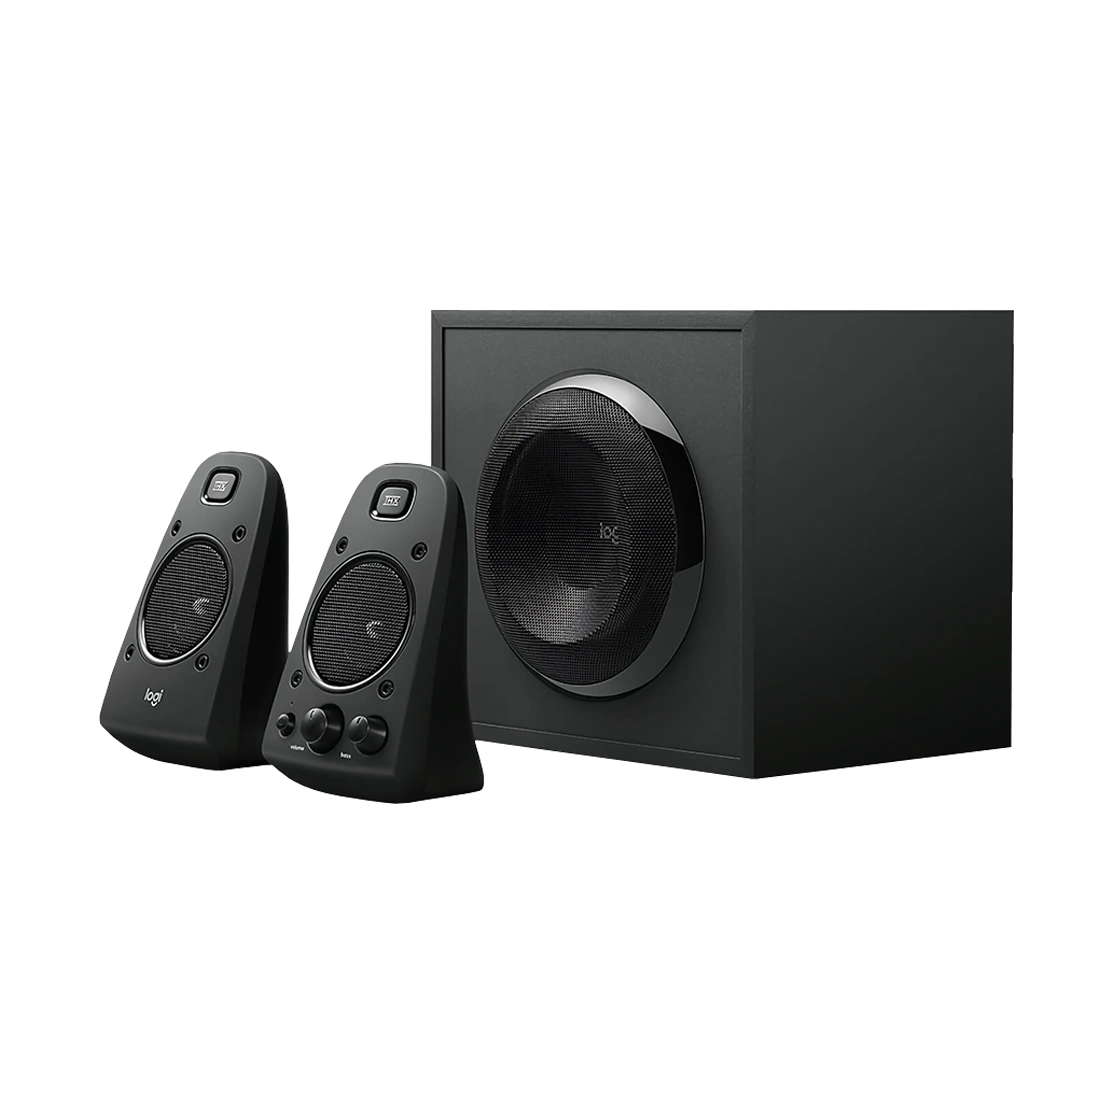 Logitech Speakers System With Subwoofer Z623